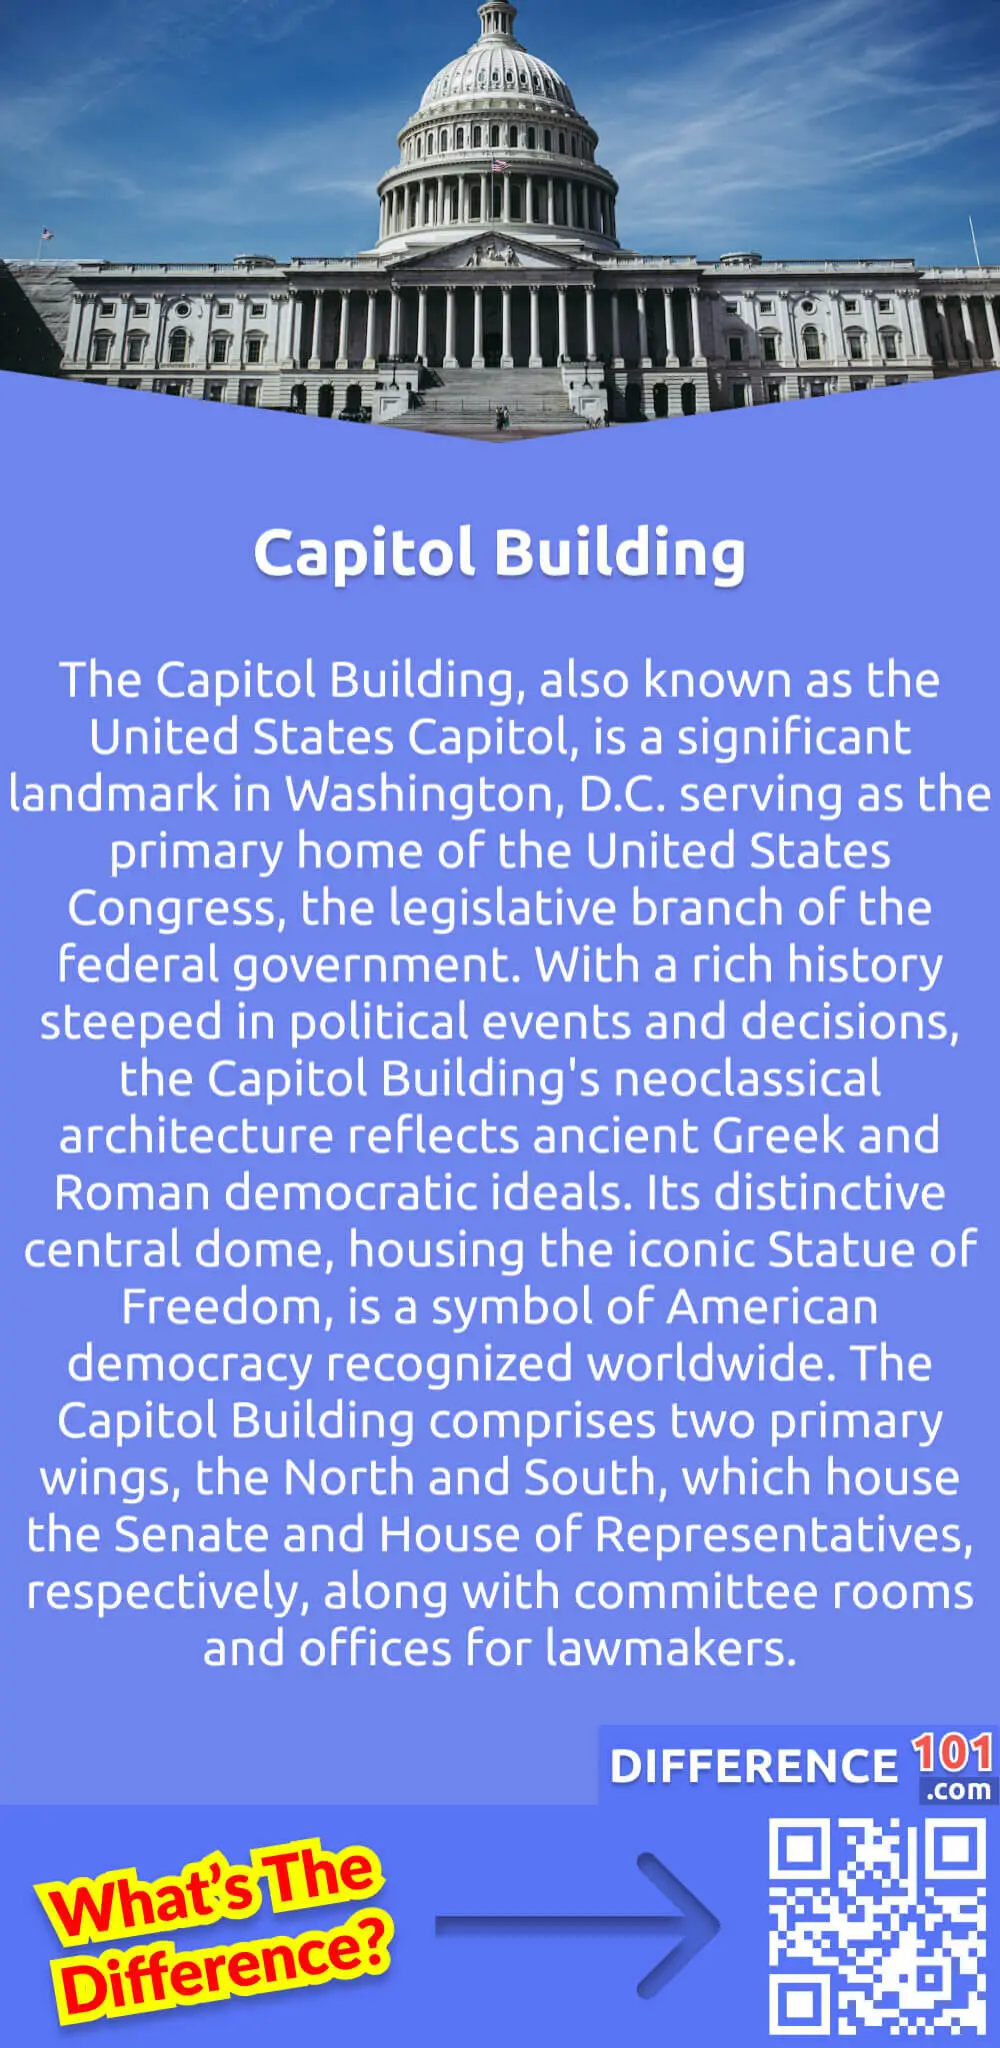 What Is Capitol Building? The Capitol Building, also known as the United States Capitol, is a significant landmark in Washington, D.C. serving as the primary home of the United States Congress, the legislative branch of the federal government. With a rich history steeped in political events and decisions, the Capitol Building's neoclassical architecture reflects ancient Greek and Roman democratic ideals. Its distinctive central dome, housing the iconic Statue of Freedom, is a symbol of American democracy recognized worldwide. The Capitol Building comprises two primary wings, the North and South, which house the Senate and House of Representatives, respectively, along with committee rooms and offices for lawmakers.
